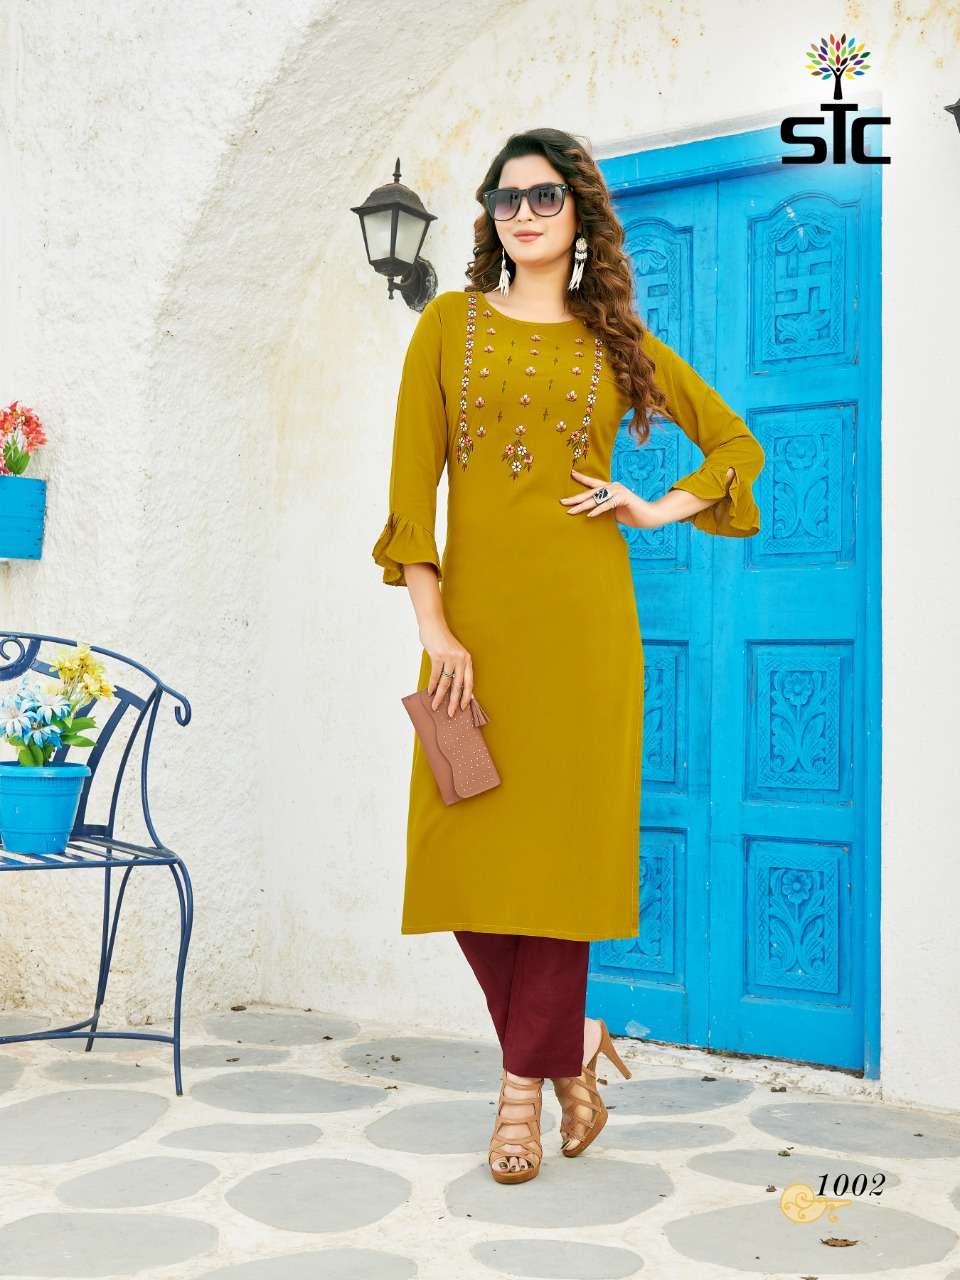 GLORIOUS BY STC 1001 TO 1005 SERIES BEAUTIFUL STYLISH FANCY COLORFUL CASUAL WEAR & ETHNIC WEAR & READY TO WEAR RAYON WORKED KURTIS WITH BOTTOM AT WHOLESALE PRICE